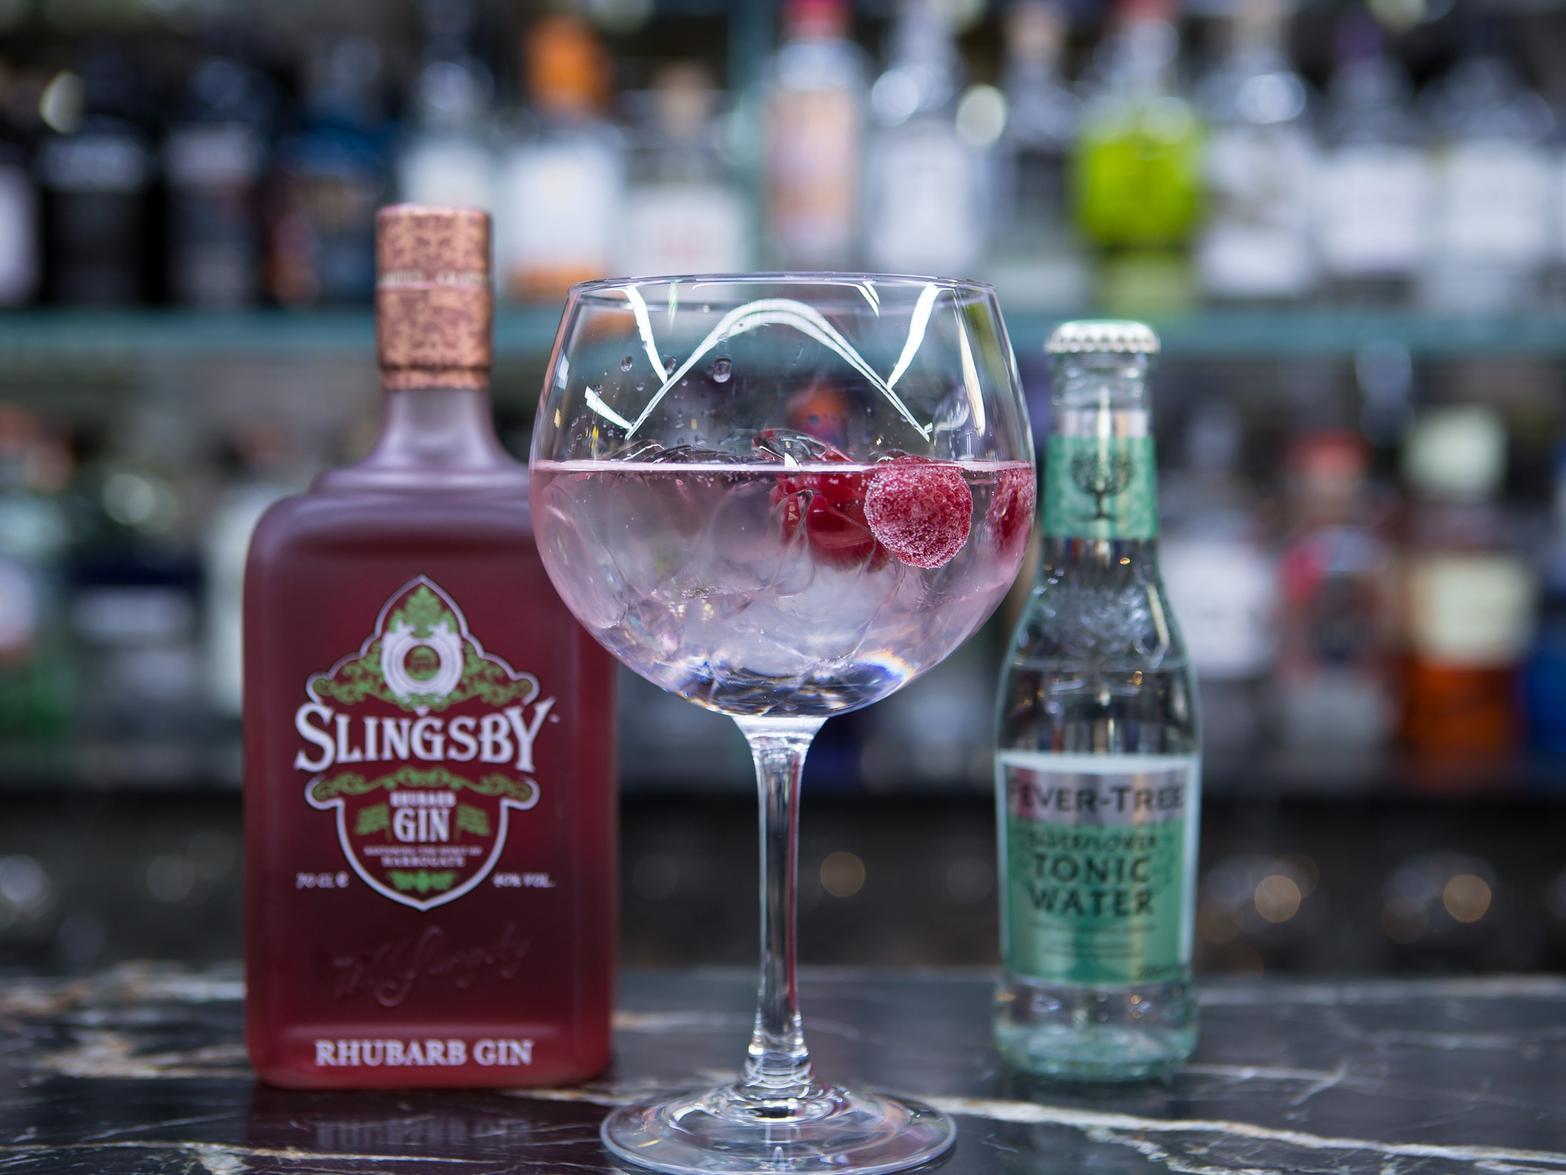 This Piece Hall venue is a gin lovers paradise with around 60 brands on offer. Knowlegable staff can pair different gins with tonic to make your perfect drink, or customers can enjoy coffee and cake if they prefer.